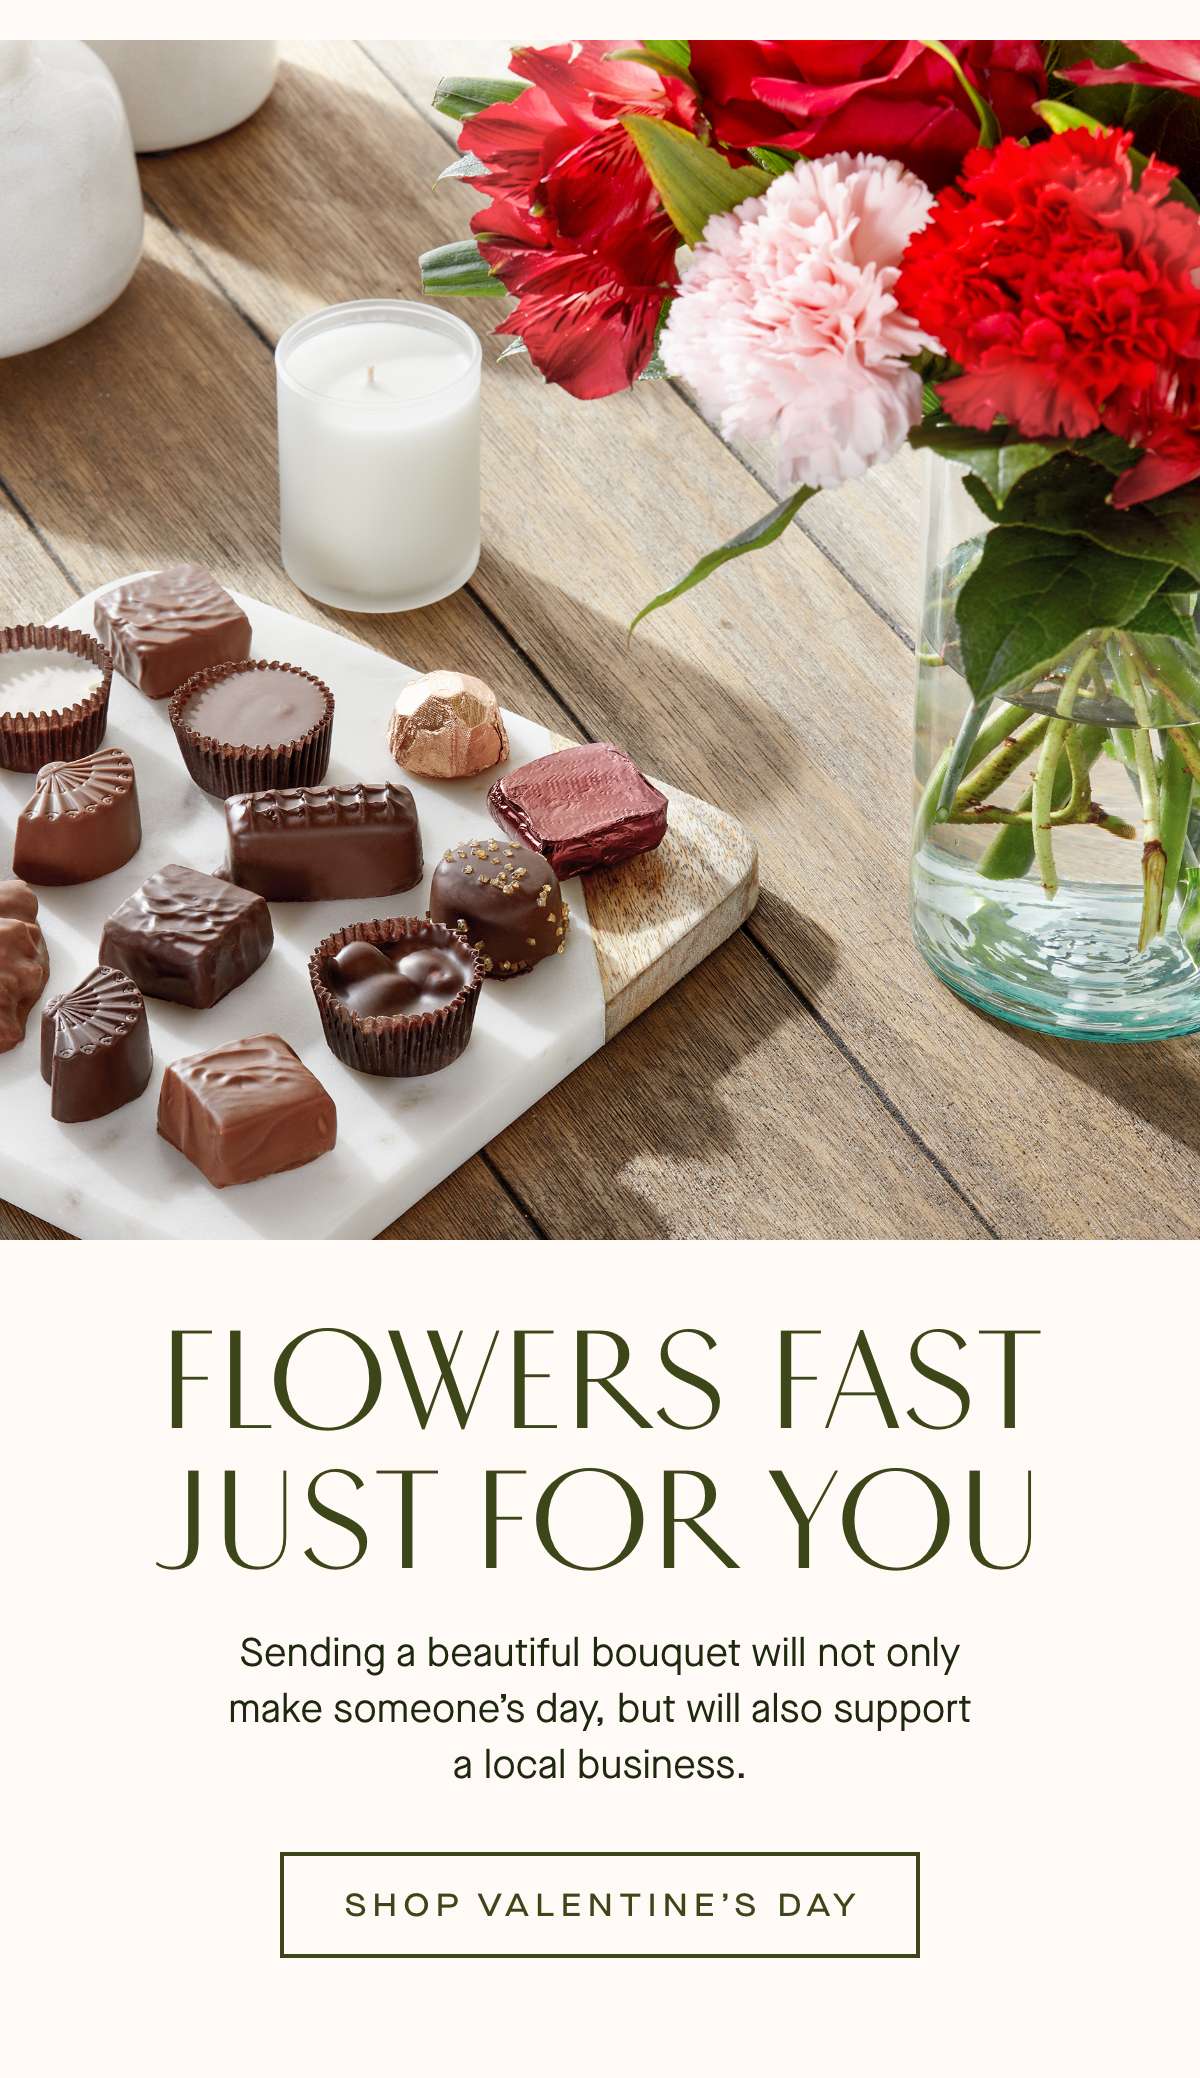 FLOWERS FAST JUST FOR YOU - Sending a beautiful bouquet will not only  make someones day, but will also support  a local business. - SHOP VALENTINE'S DAY 